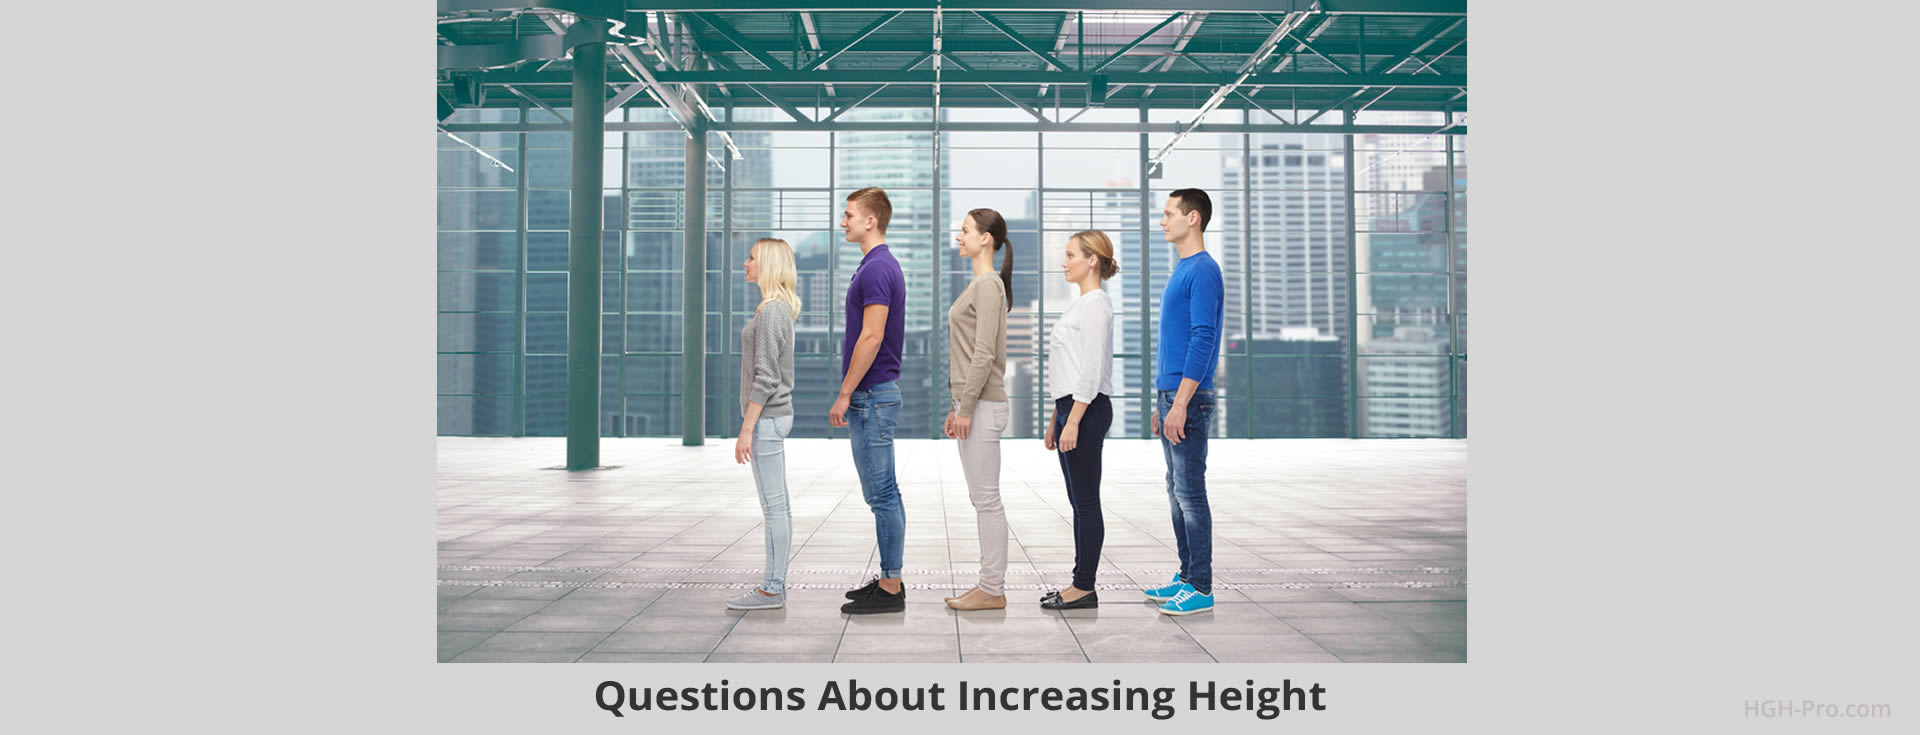 HGH to increase height?